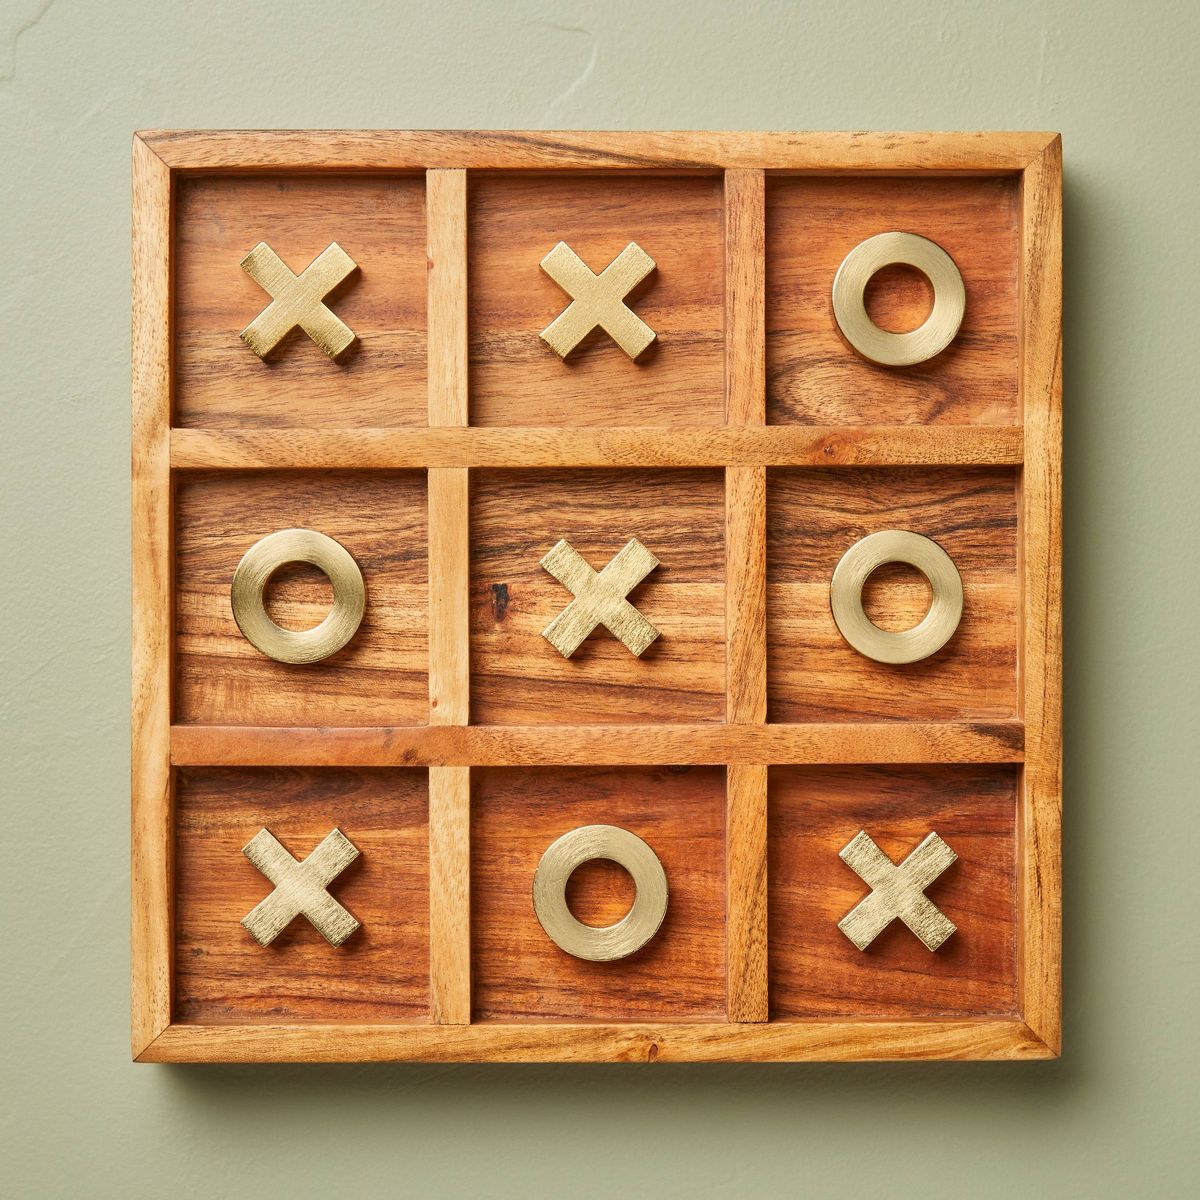 Brass and Wood Tic-Tac-Toe Game - 10pc - Hearth & Hand™ with Magnolia | Target